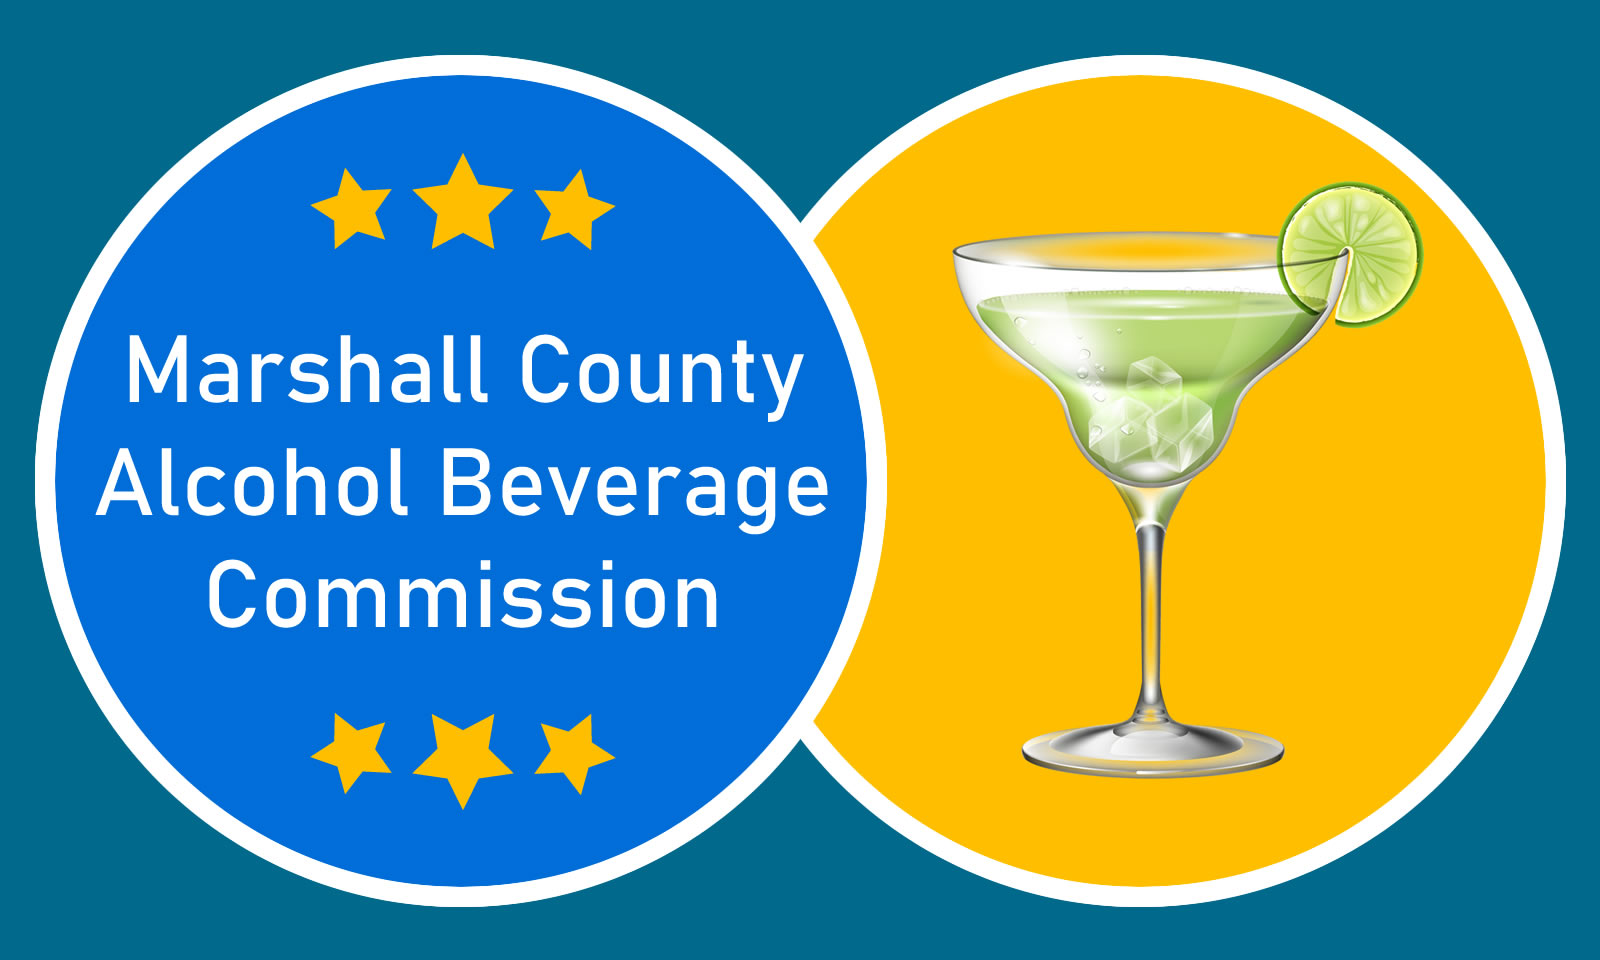 Marshall County Alcohol Beverage Commission